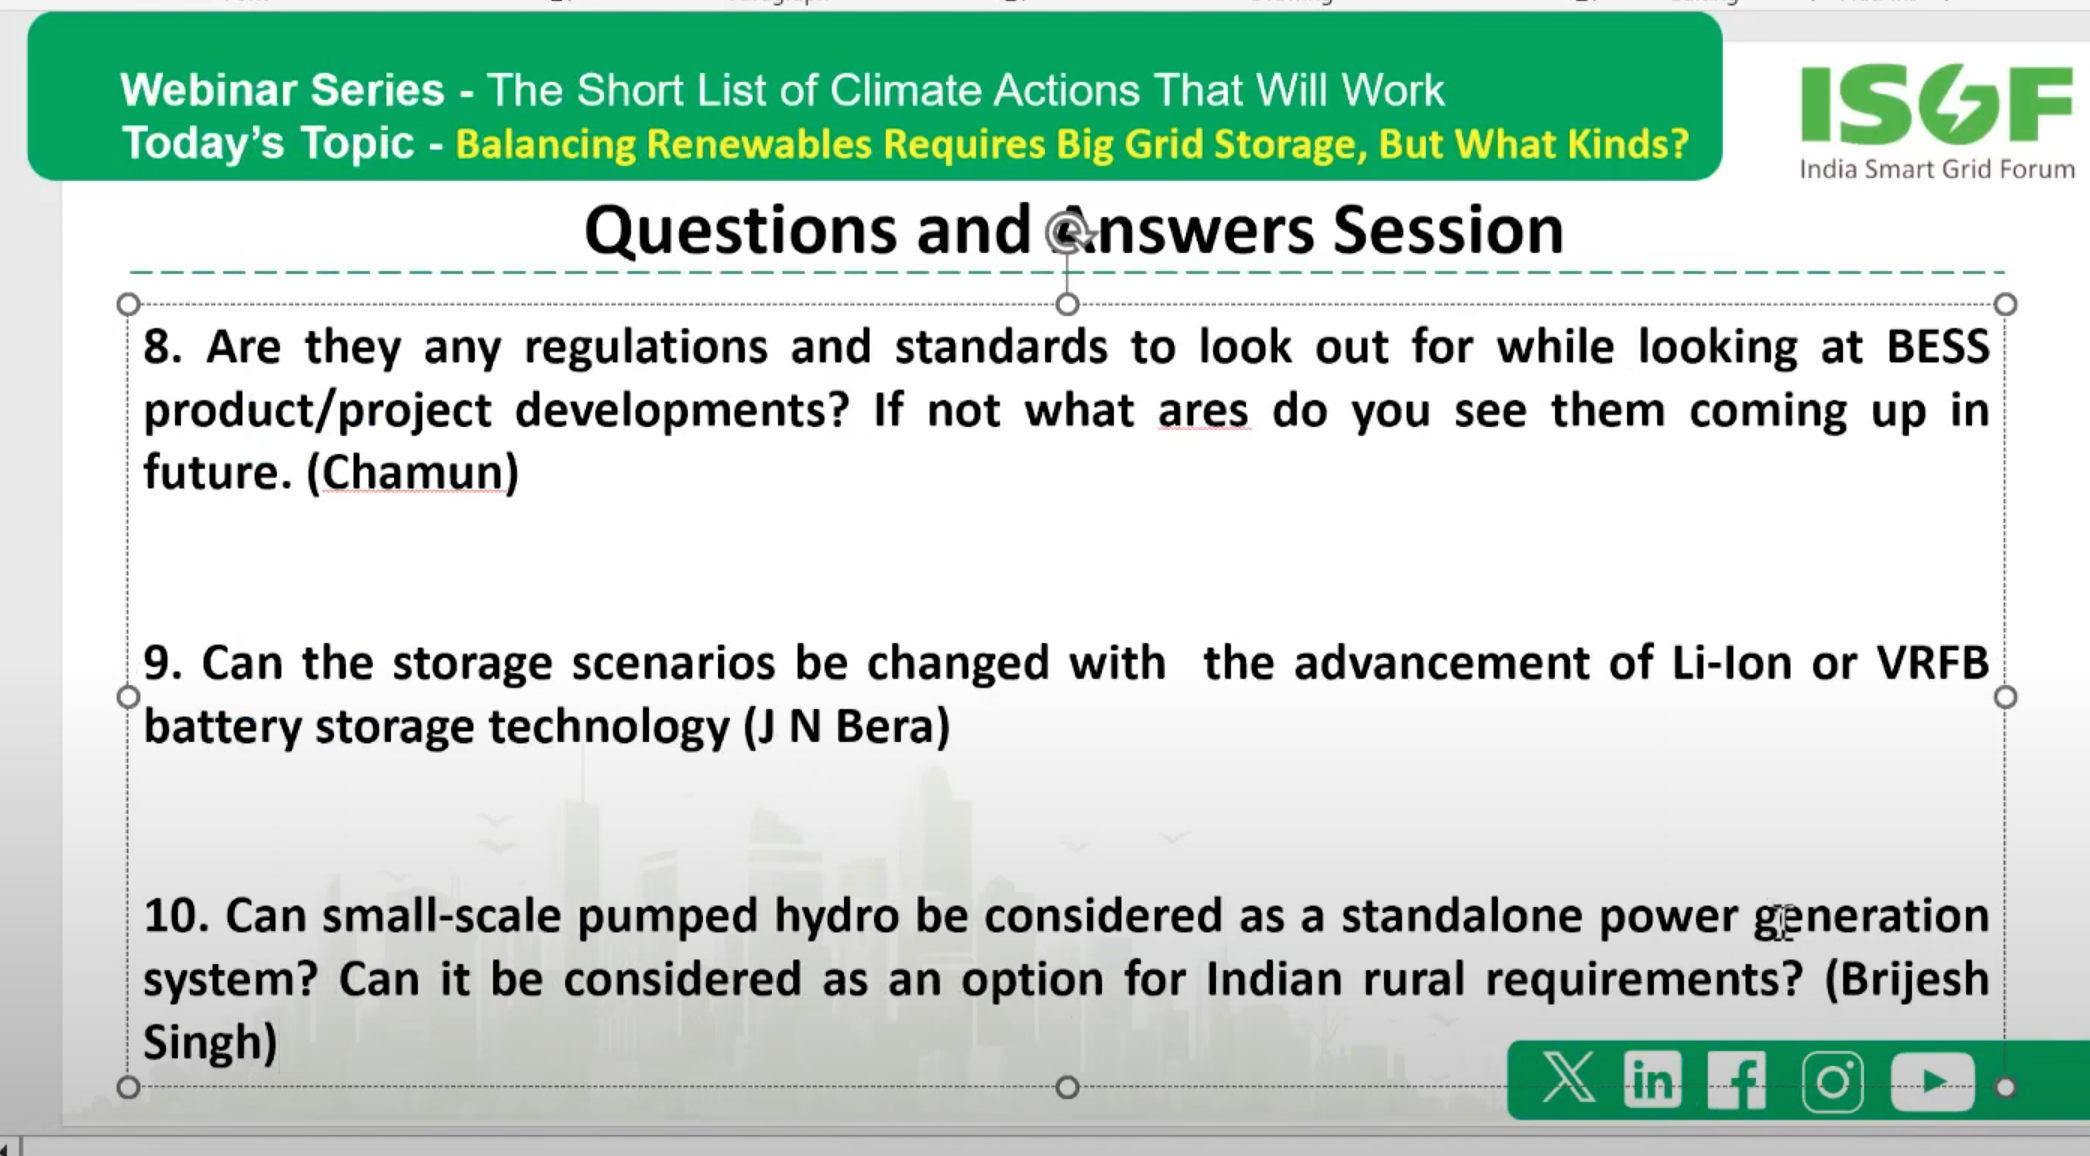 Questions from participants from Michael Barnard's seminar on grid storage through the Indian Smart Grid Forum